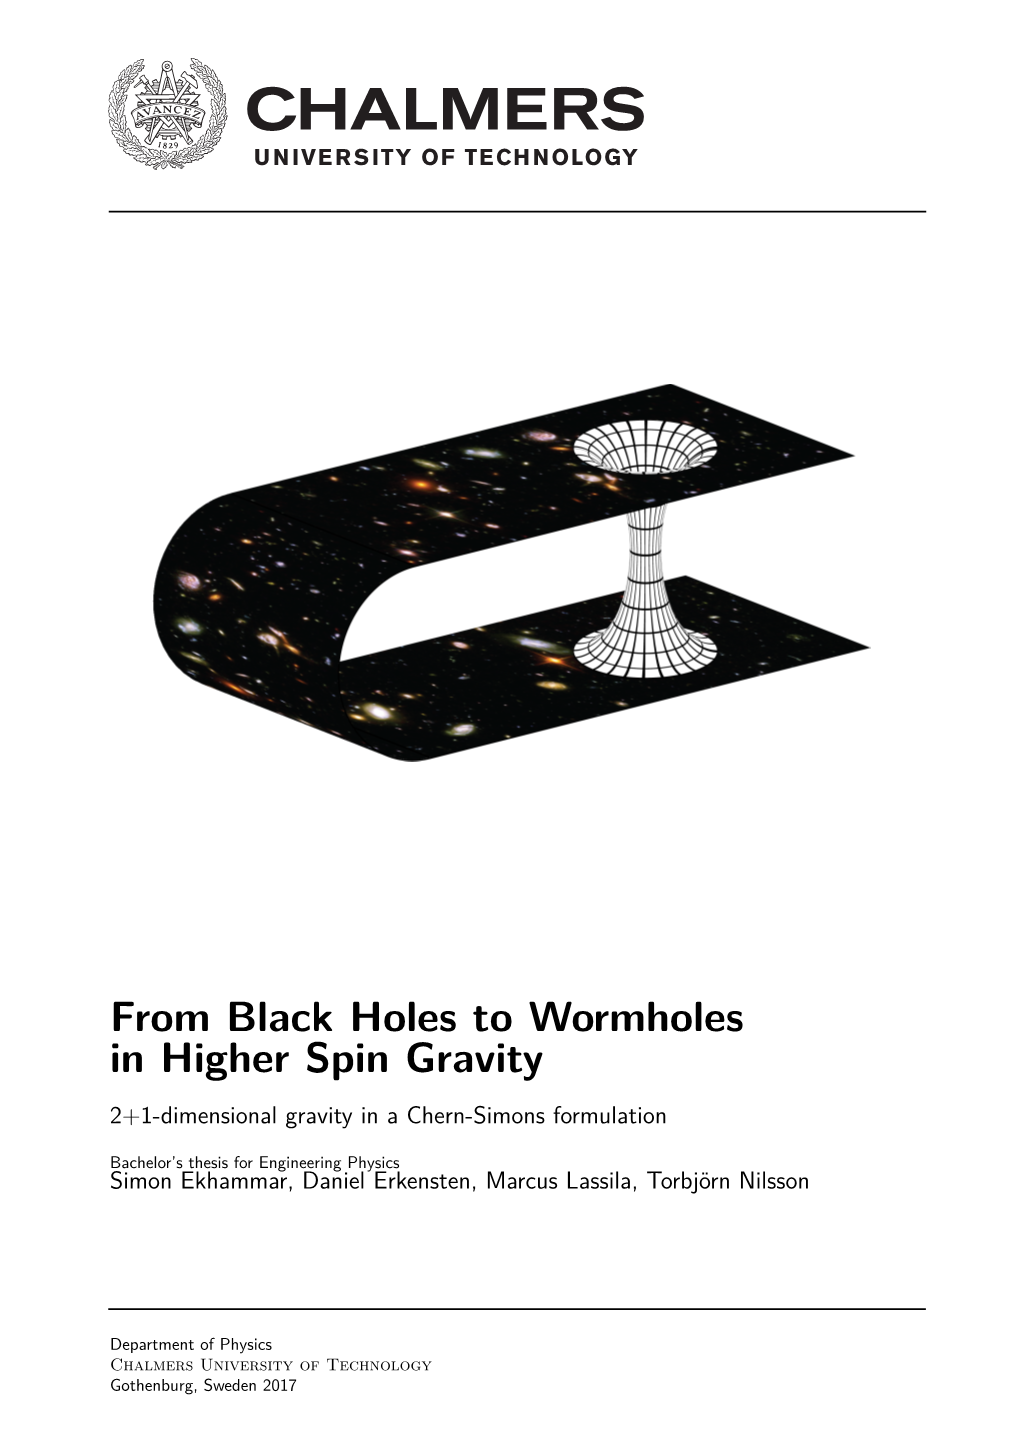 From Black Holes to Wormholes in Higher Spin Gravity 2+1-Dimensional Gravity in a Chern-Simons Formulation